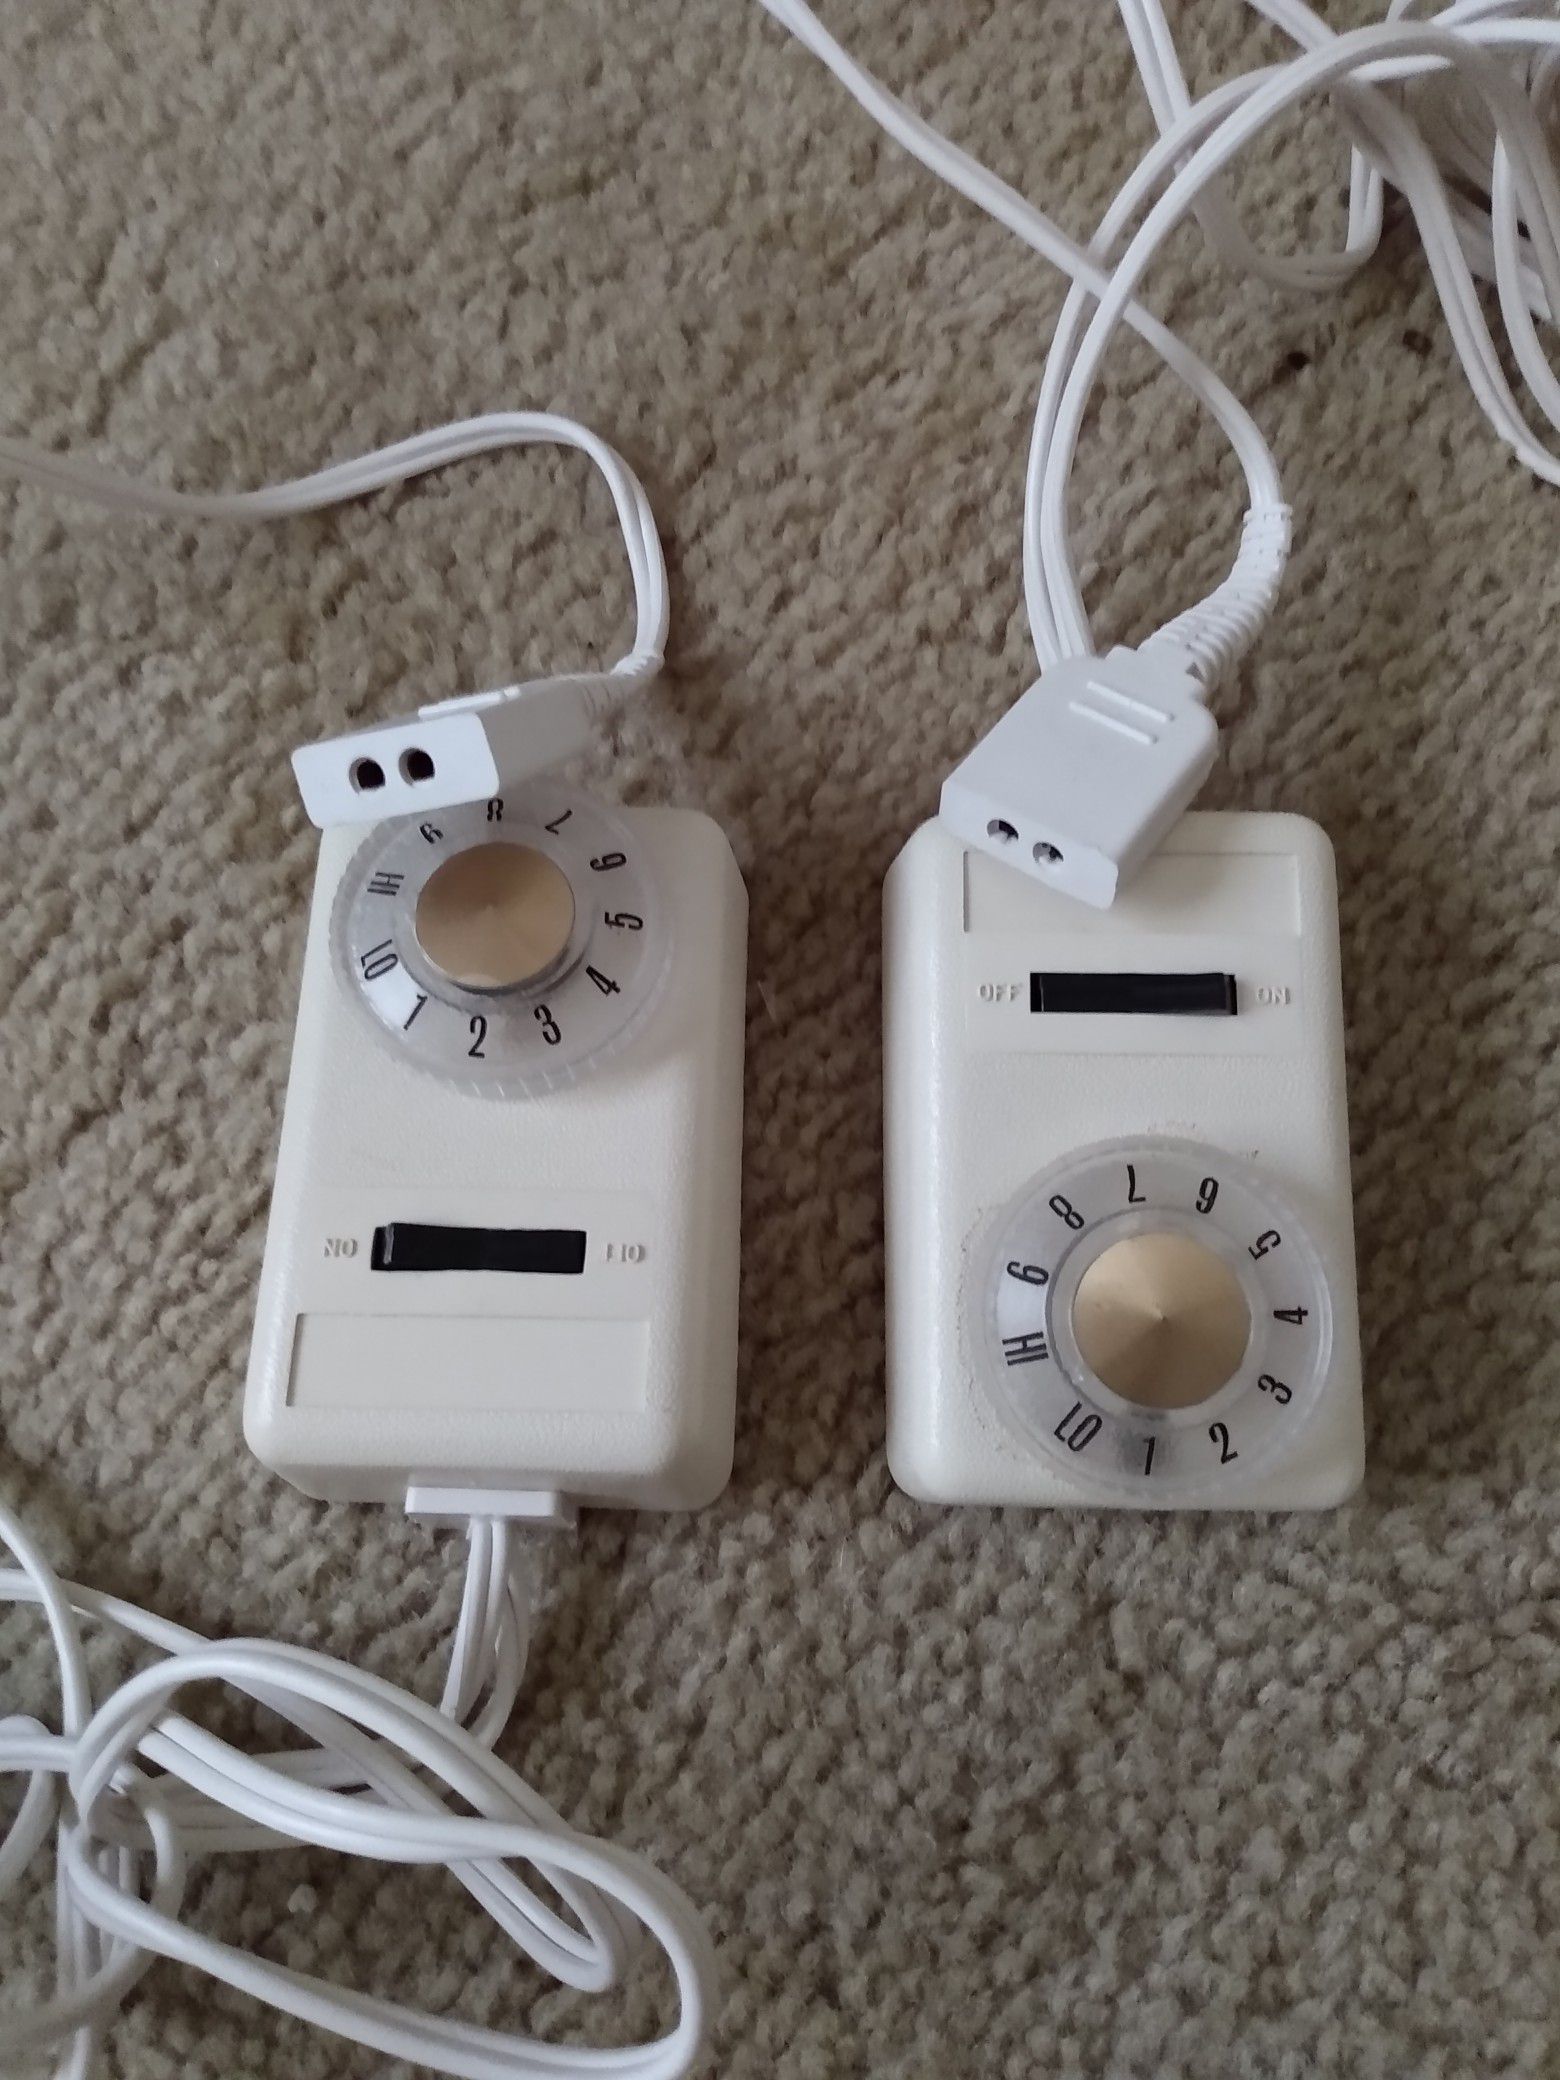 2 electric blanket and heating pad controls